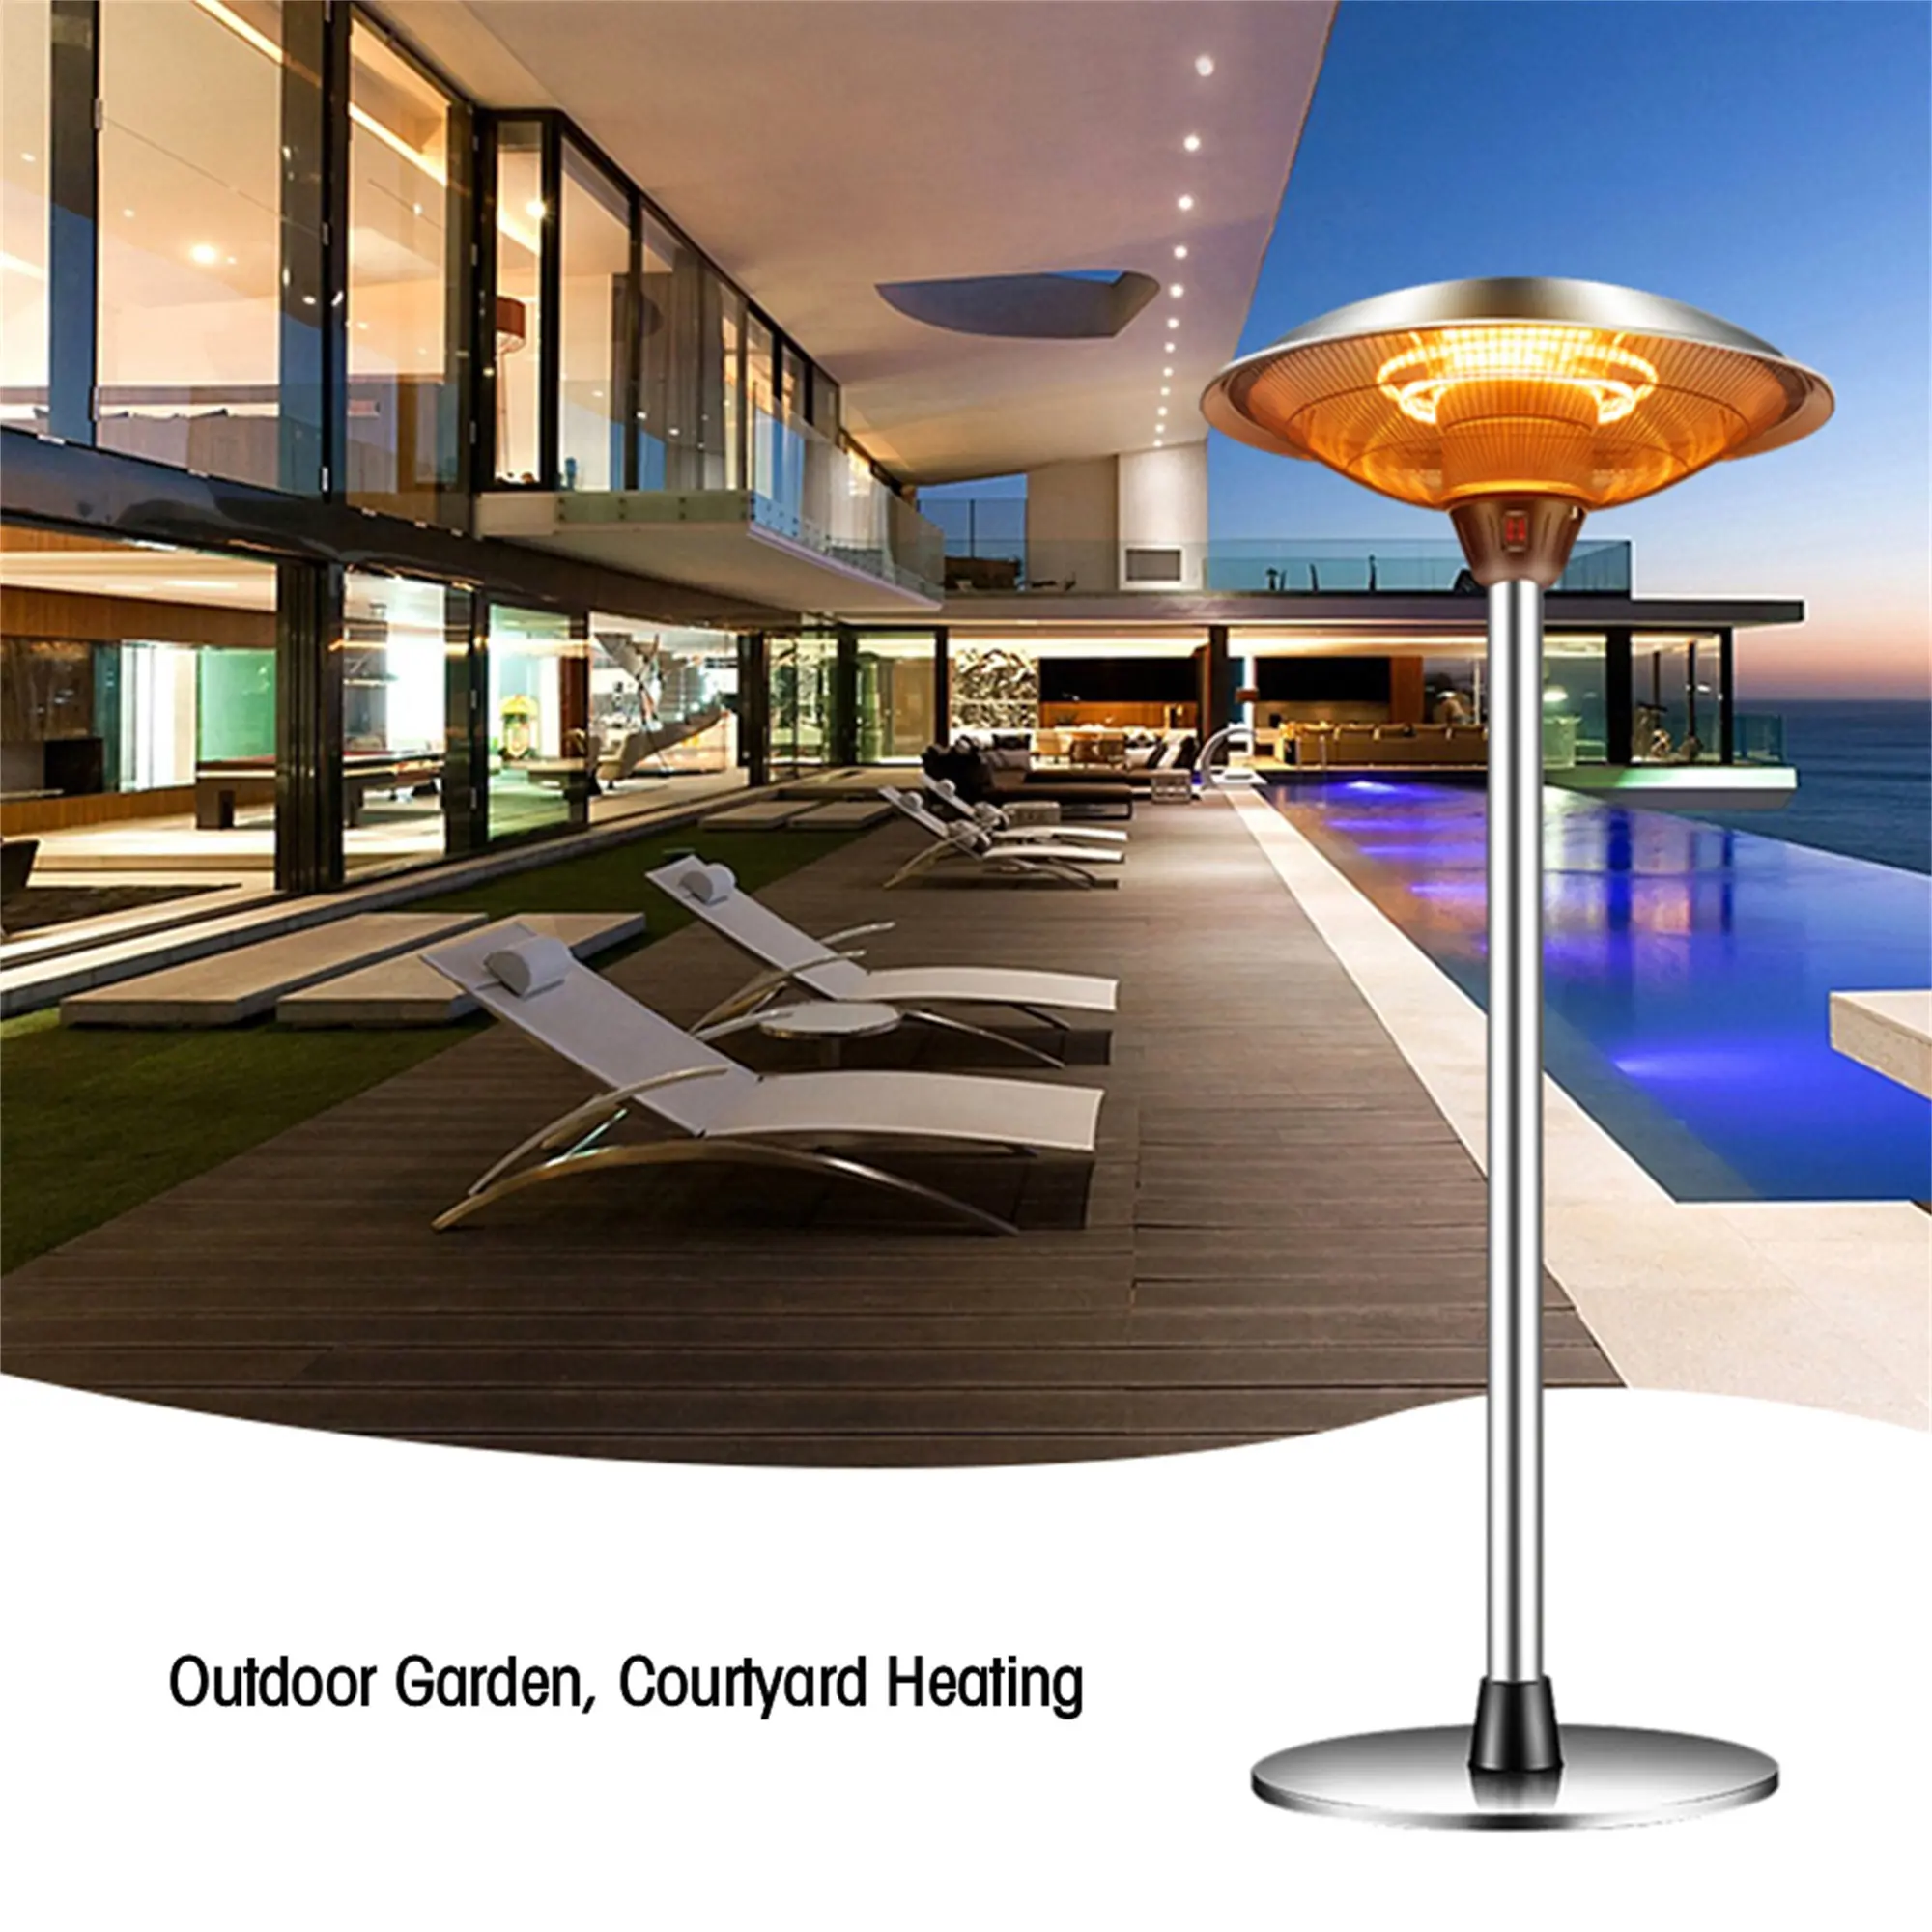 KEYO Remote Control Outdoor Garden Courtyard Heating Use Freestanding Home Electrical Heater